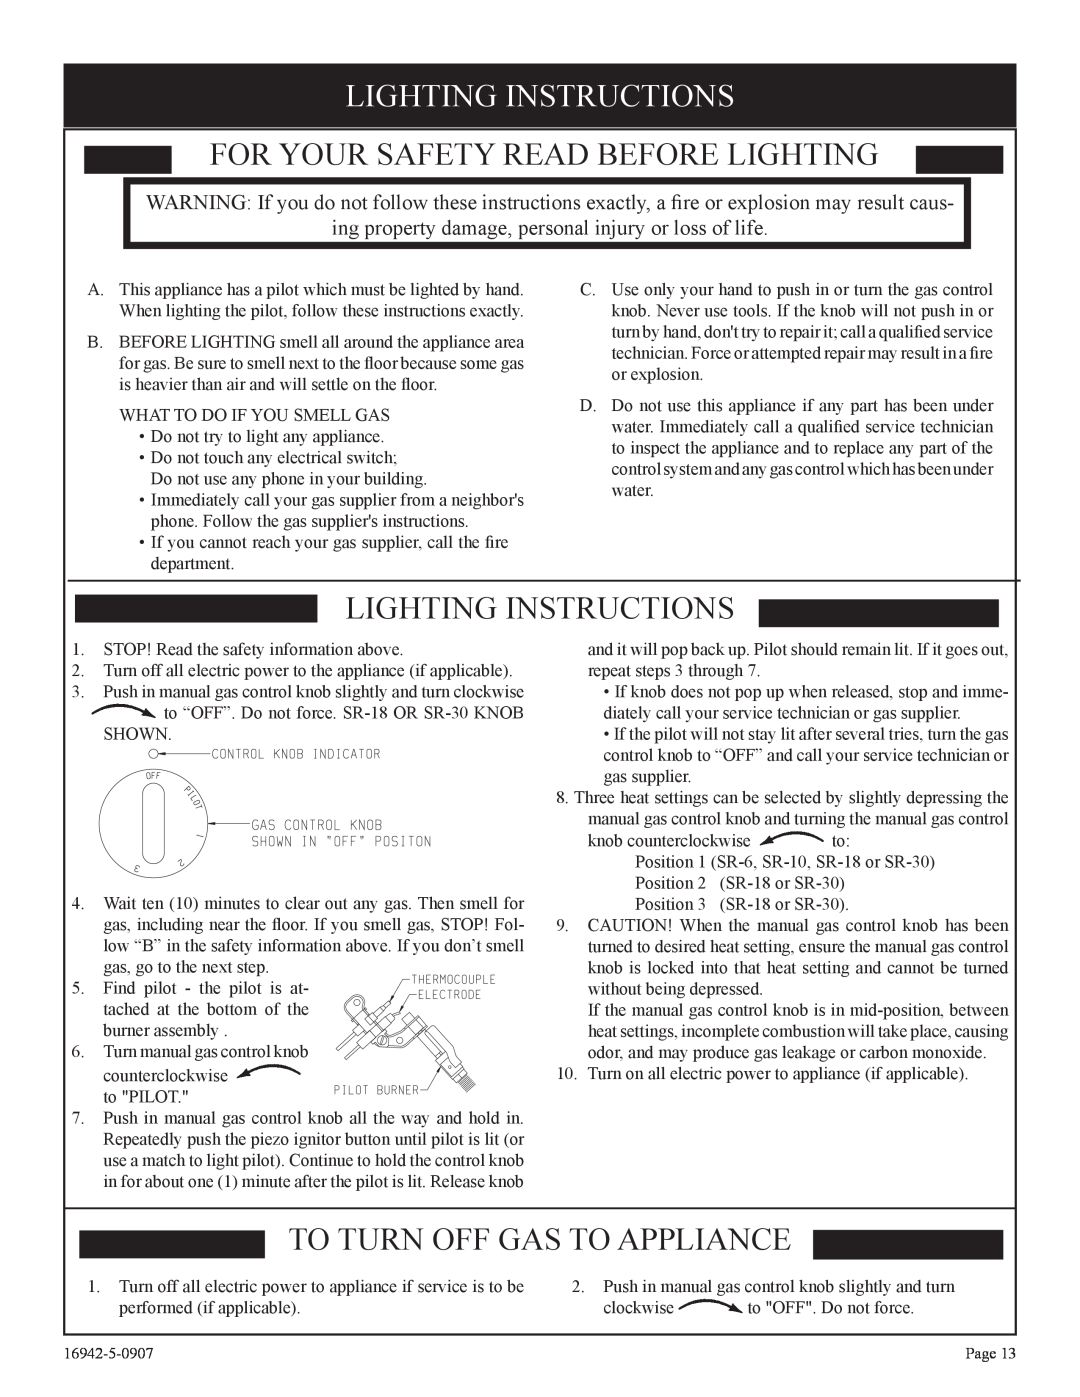 Empire Comfort Systems SR-30 Lighting Instructions, For Your Safety Read Before Lighting, To Turn Off Gas To Appliance 